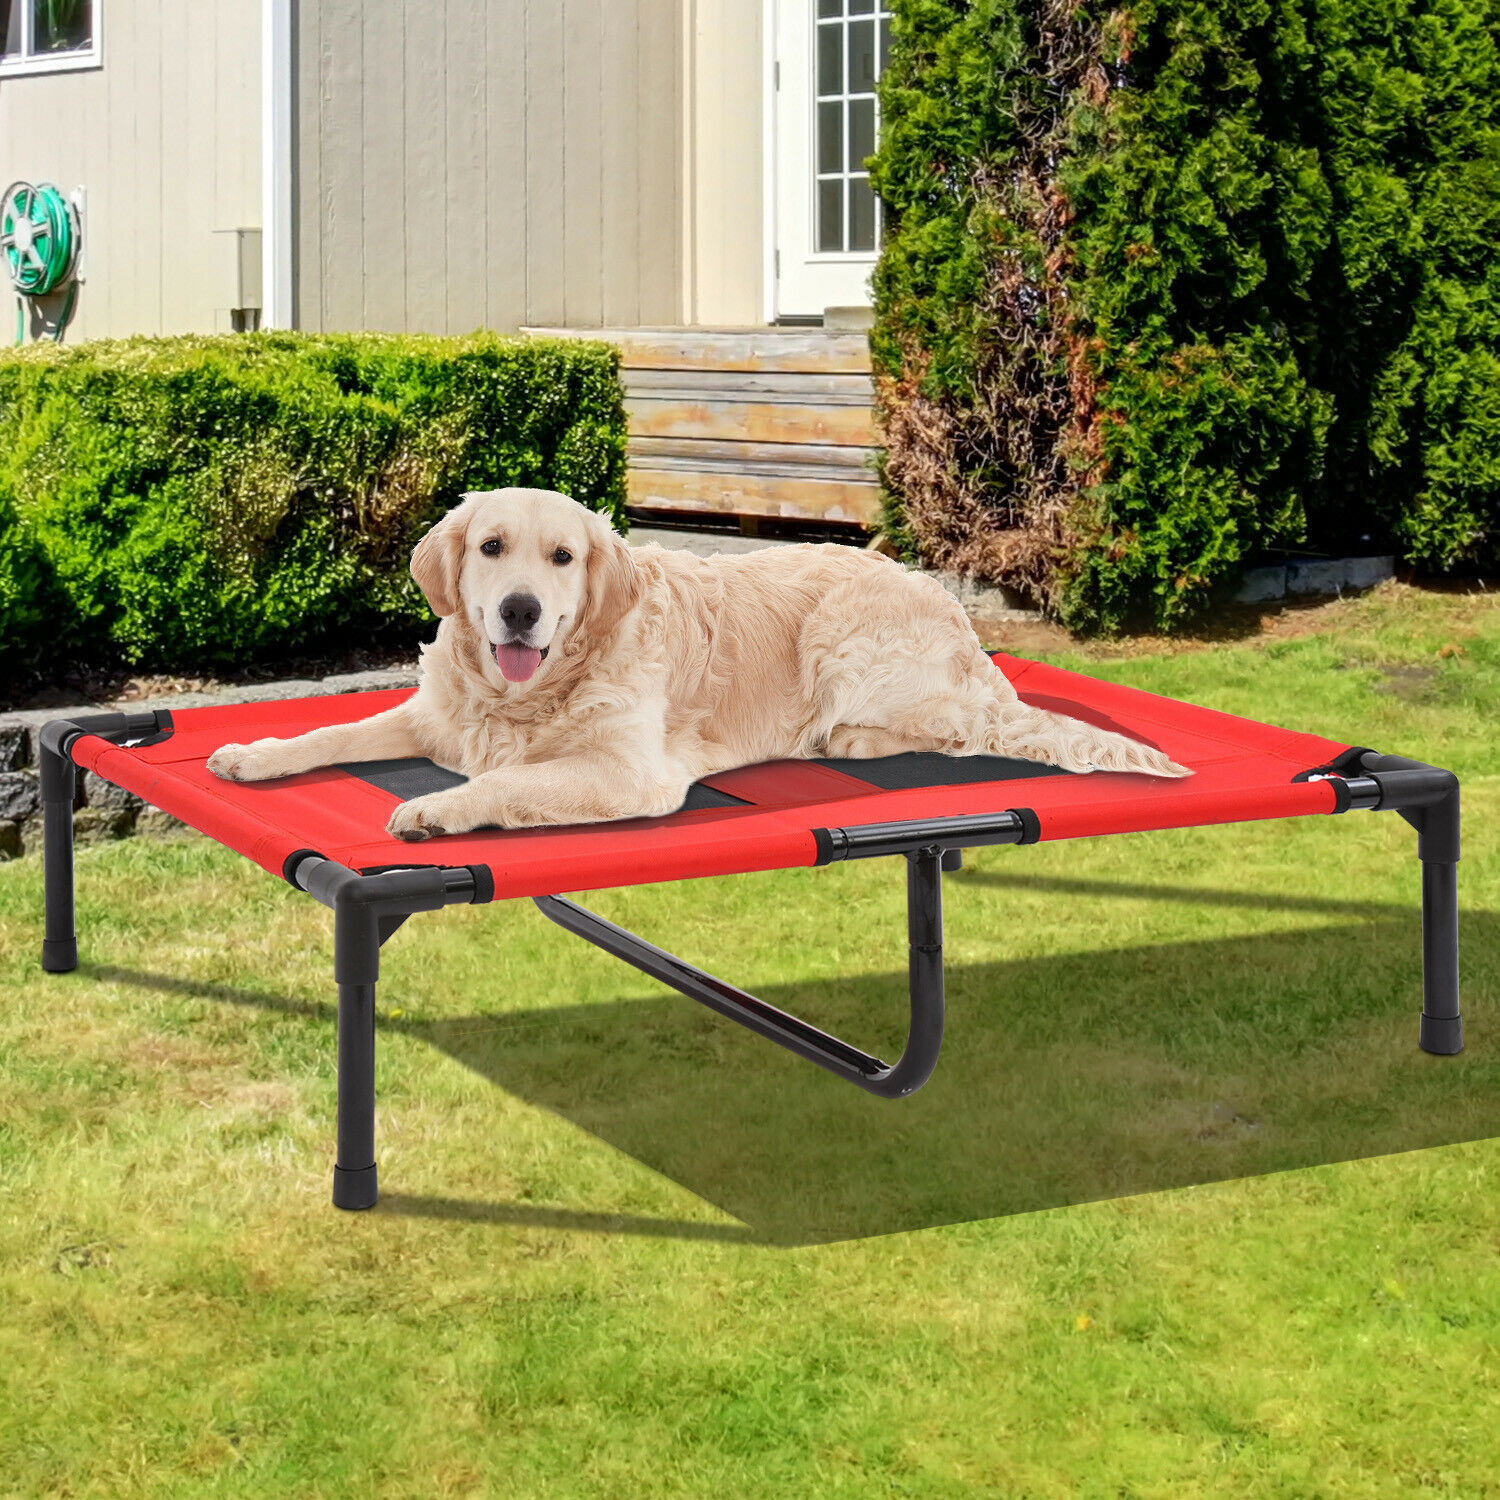 Image 1 - Large Elevated Camping Pet Cot Portable Raised Dog Cat Sleep Bed Indoor Outdoor